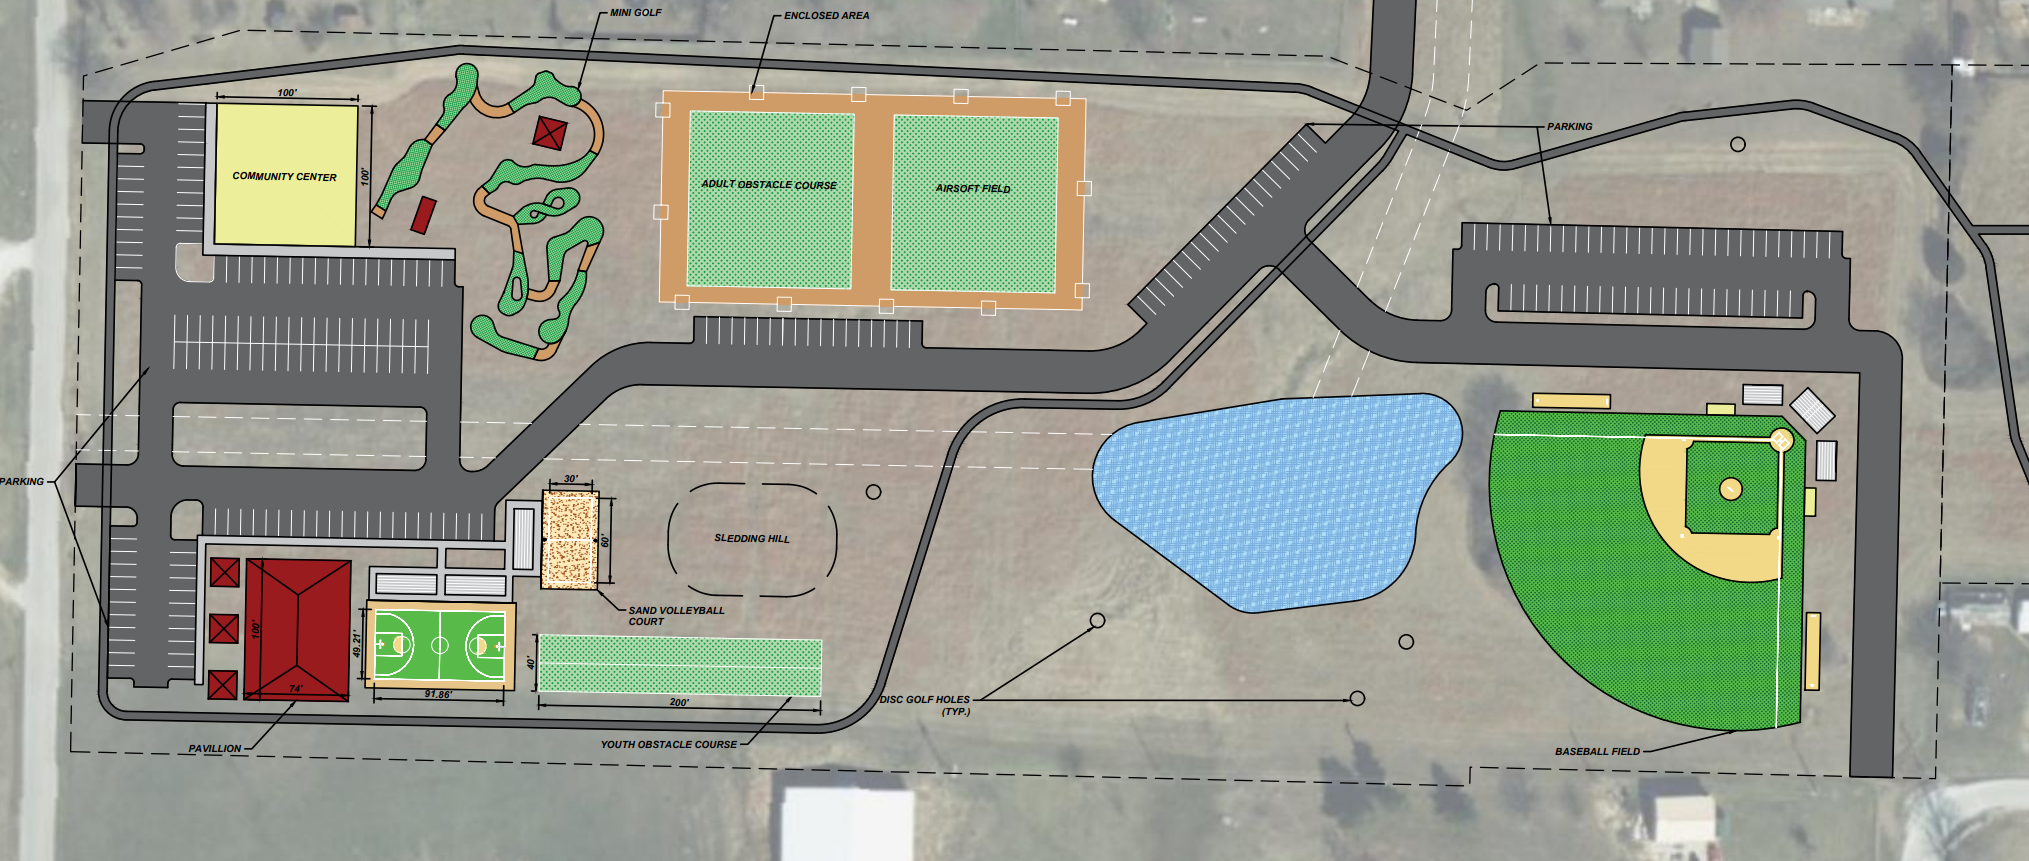 Image of plans for the land development.